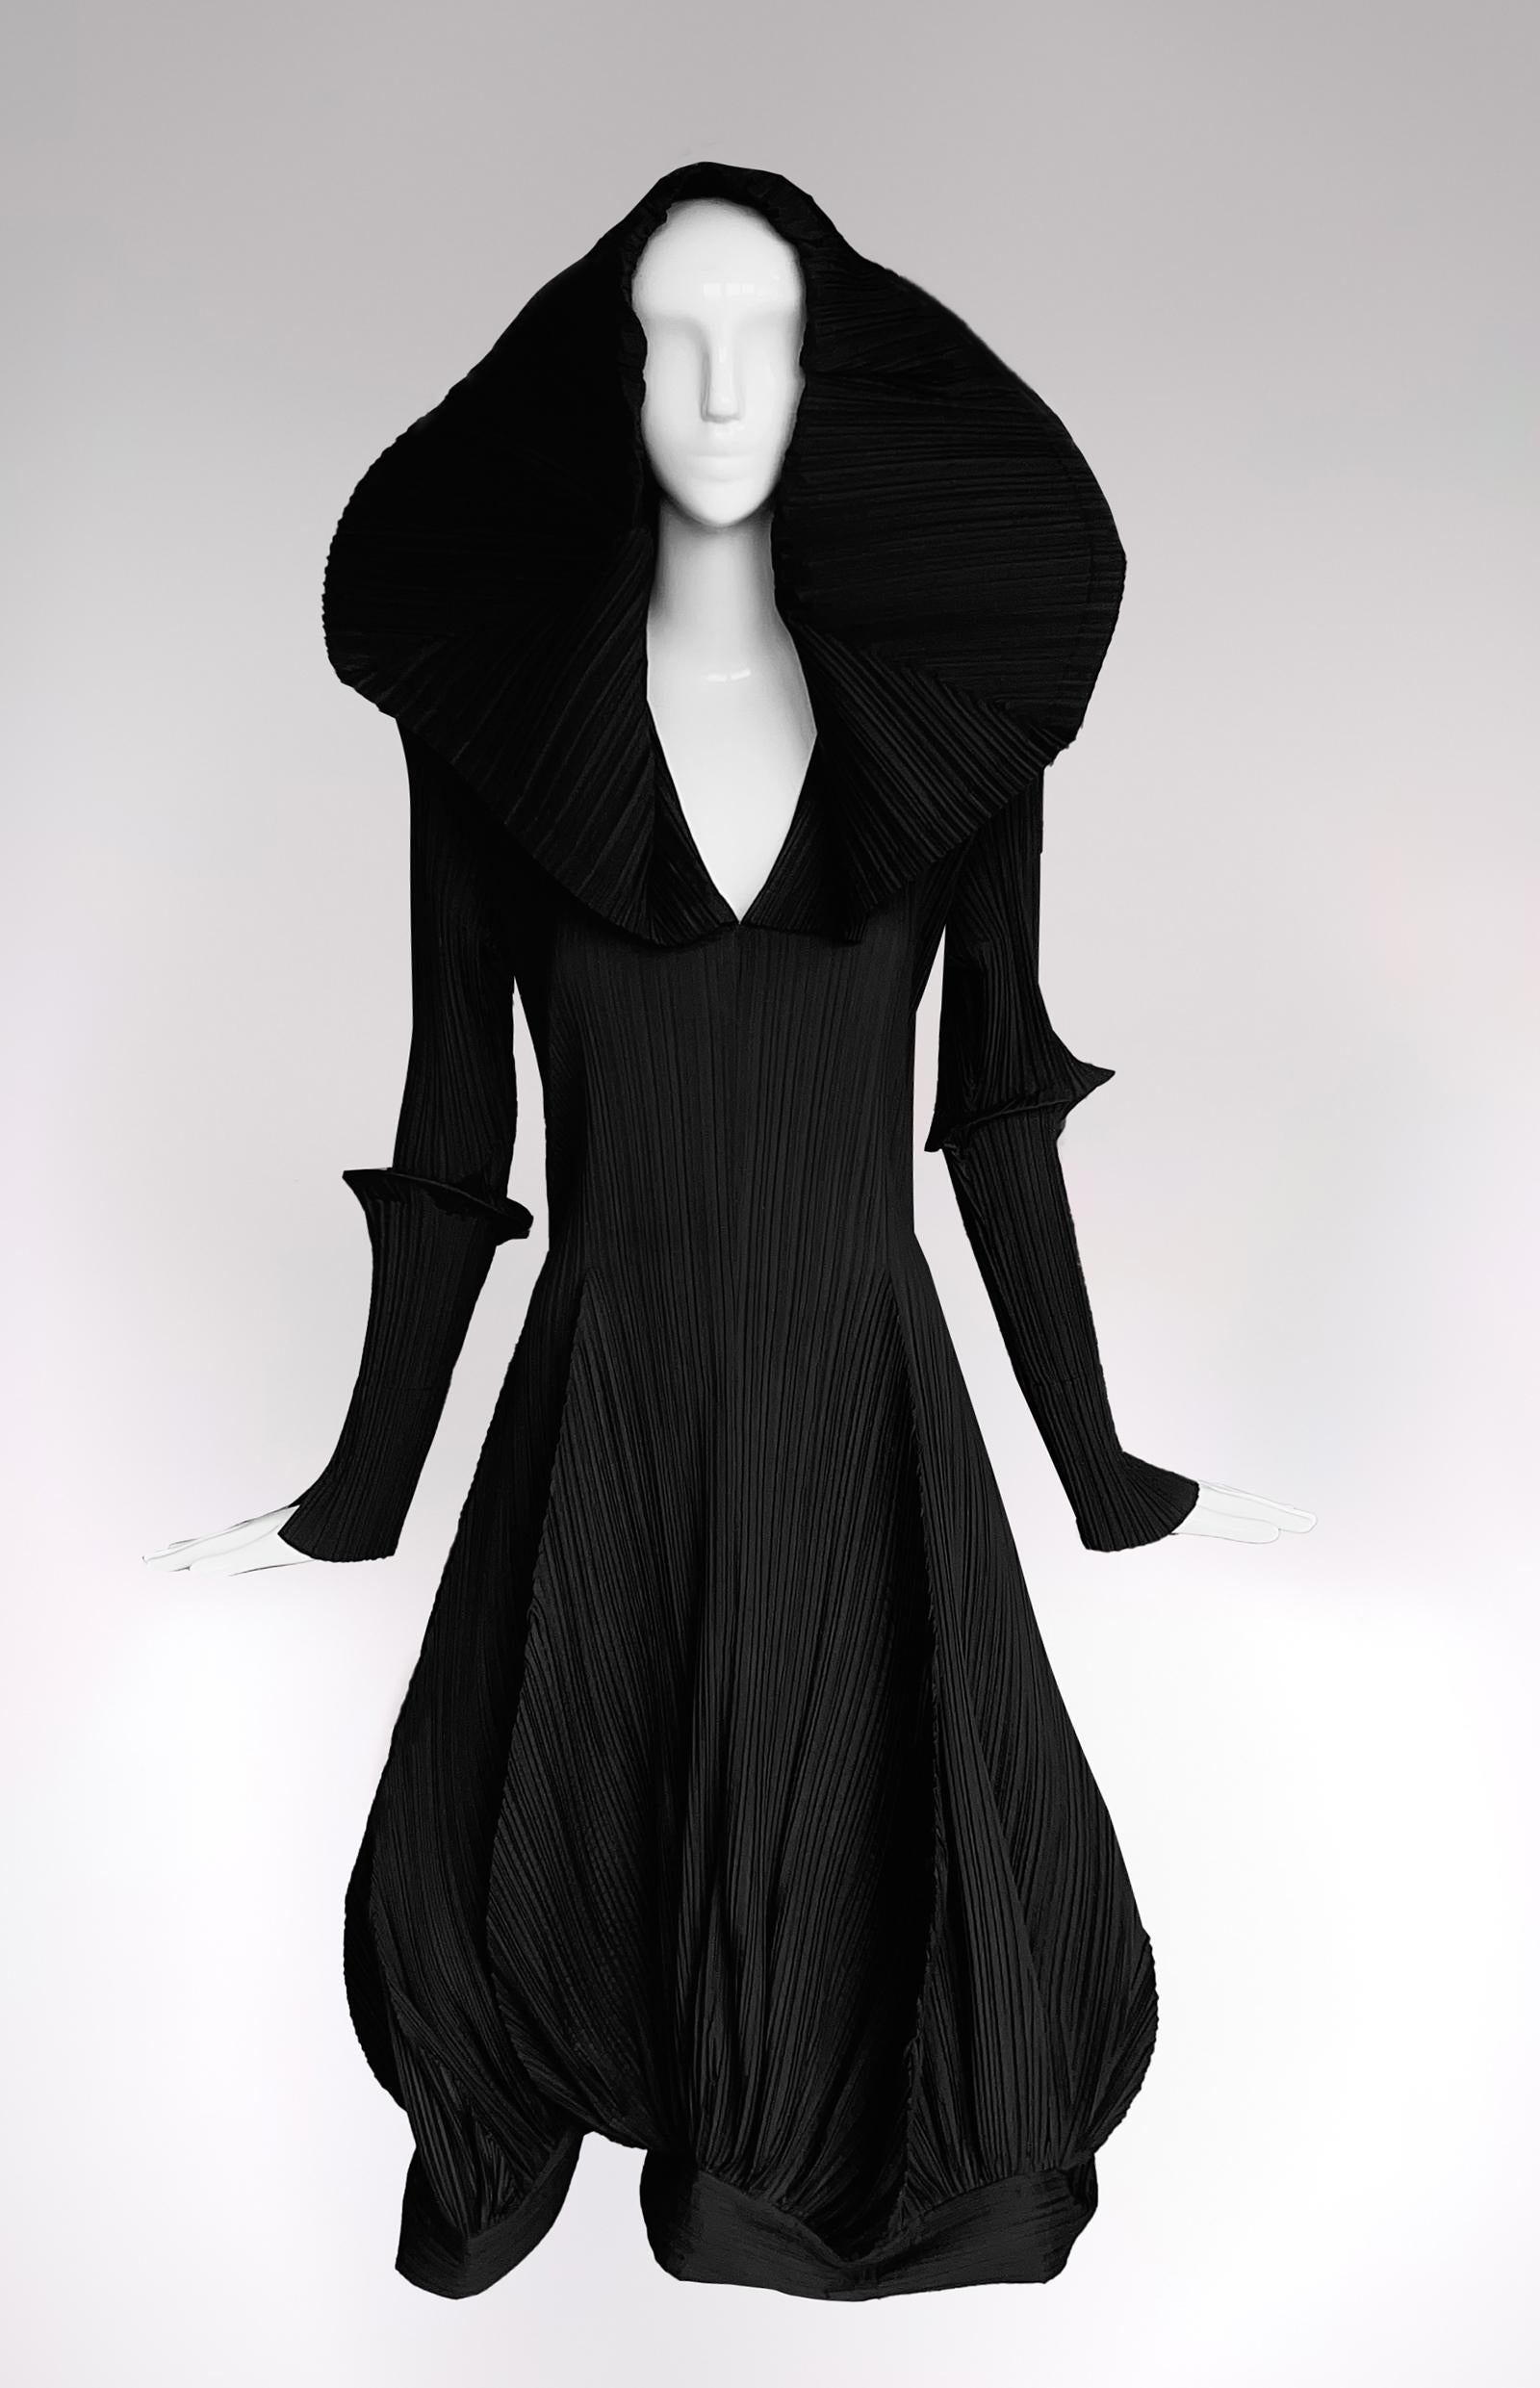 Wearble Art

Extremely rare and Museum worthy vintage Issey Miyake dress, assuming 1985 Collection. 

Gorgeous super dramatic piece of Fashion History.
Black sculptural statement dress. The big collar can be worn as hood, up or also down as shown on